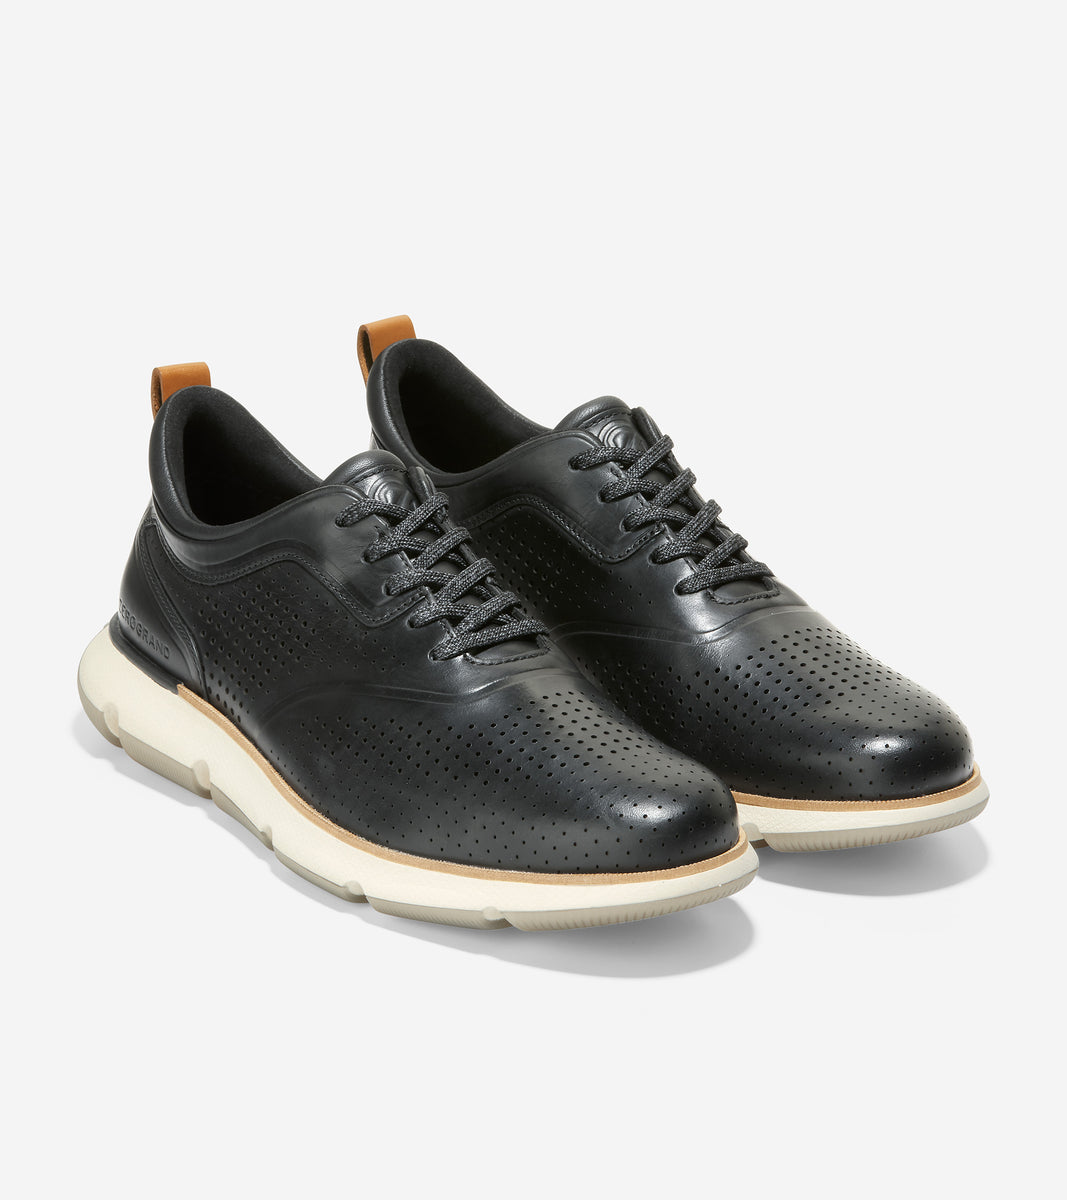 4.ZERØGRAND Perforated Oxford